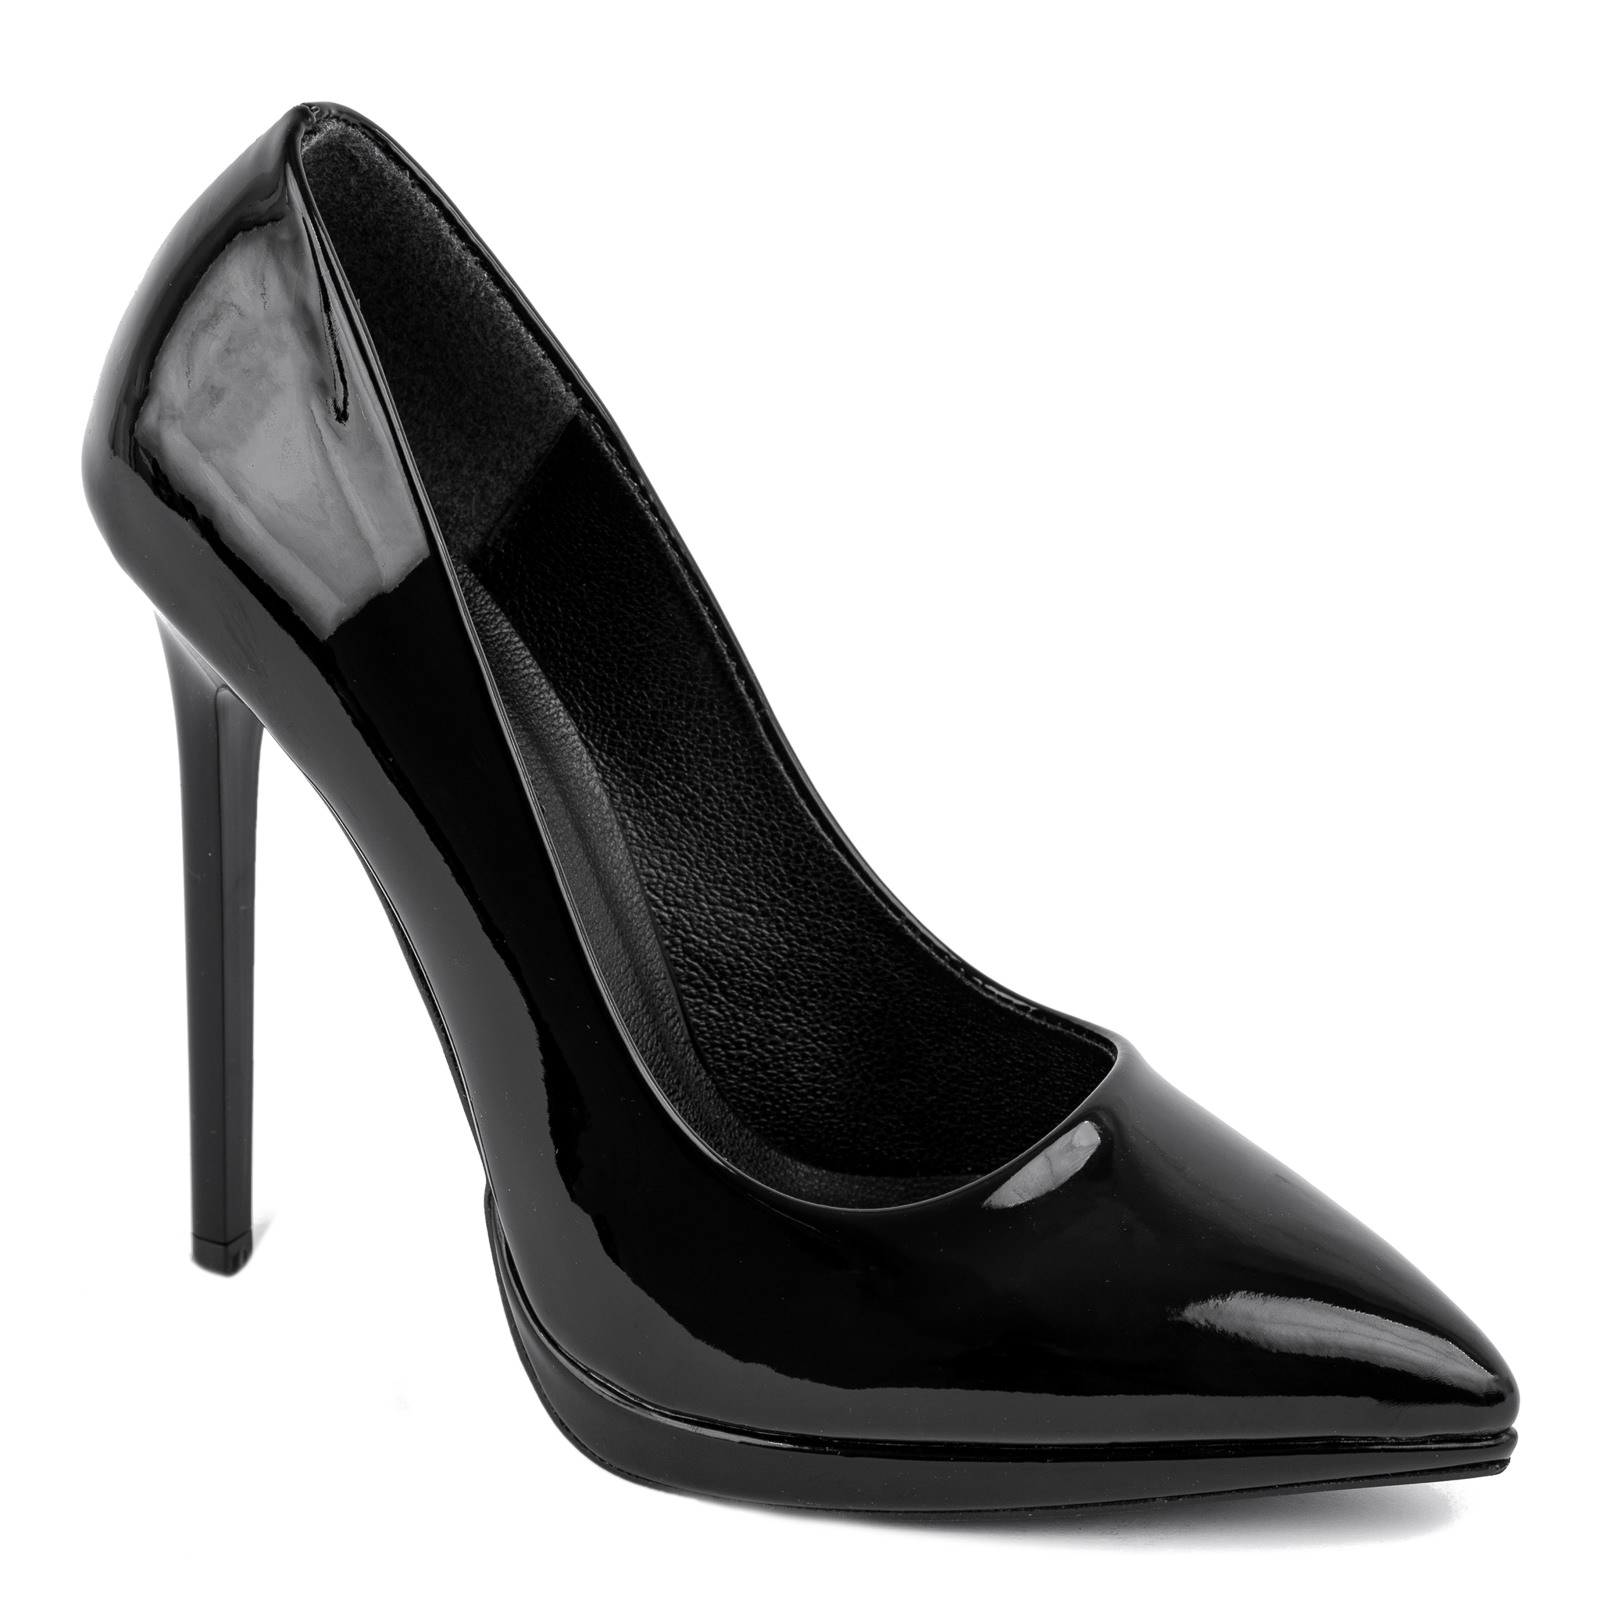 PATENT STILETTO SHOES WITH THIN HEEL - BLACK